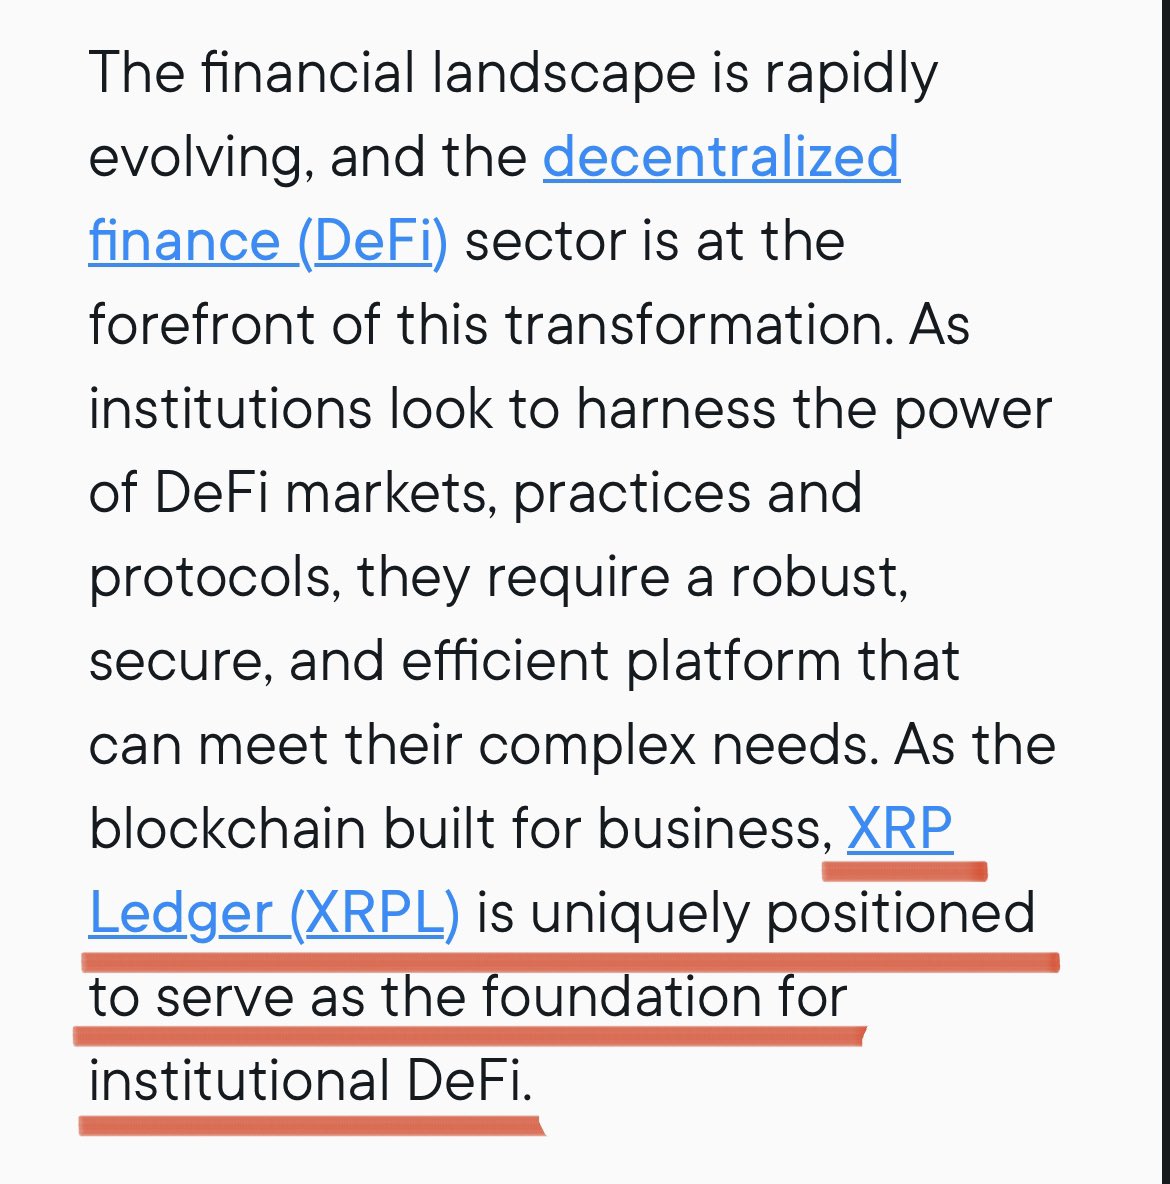 The #XRP Ledger is uniquely positioned to serve as the foundation for institutional DeFi! DeFi will be huge on the XRPL - that’s why also @TokenCTF could look at a huge price jump! The price could fly from 0.97XRP to 374.25XRP with a market cap of only $10 billion dollar!